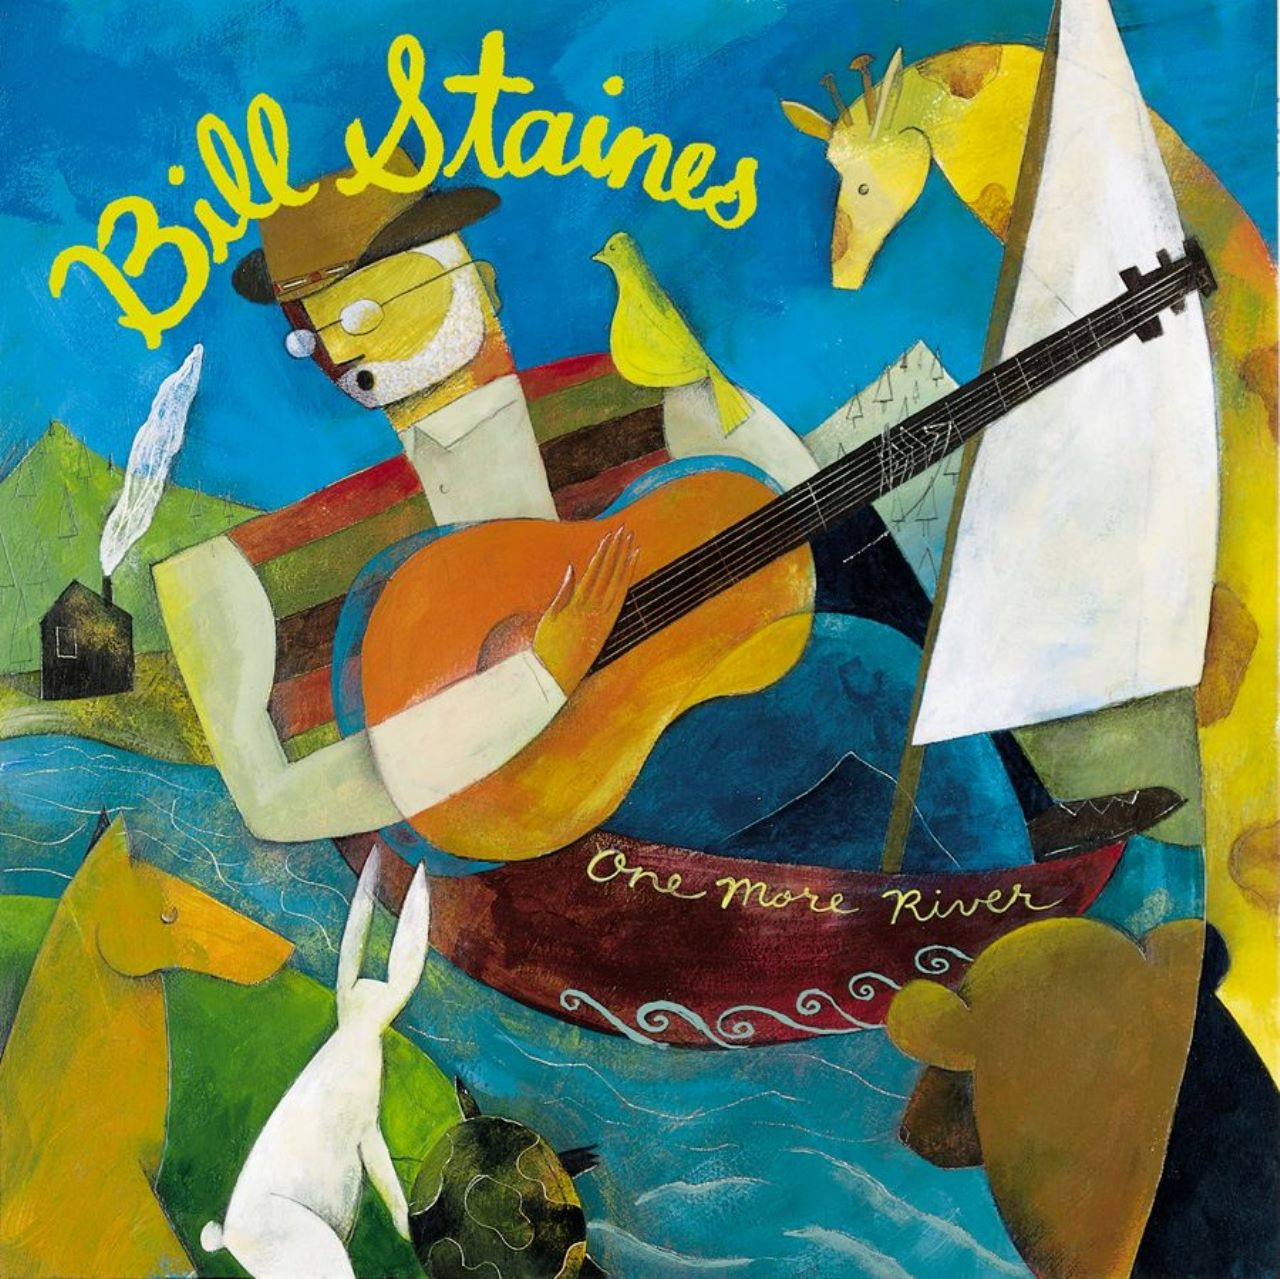 Bill Staines - One More River cover album